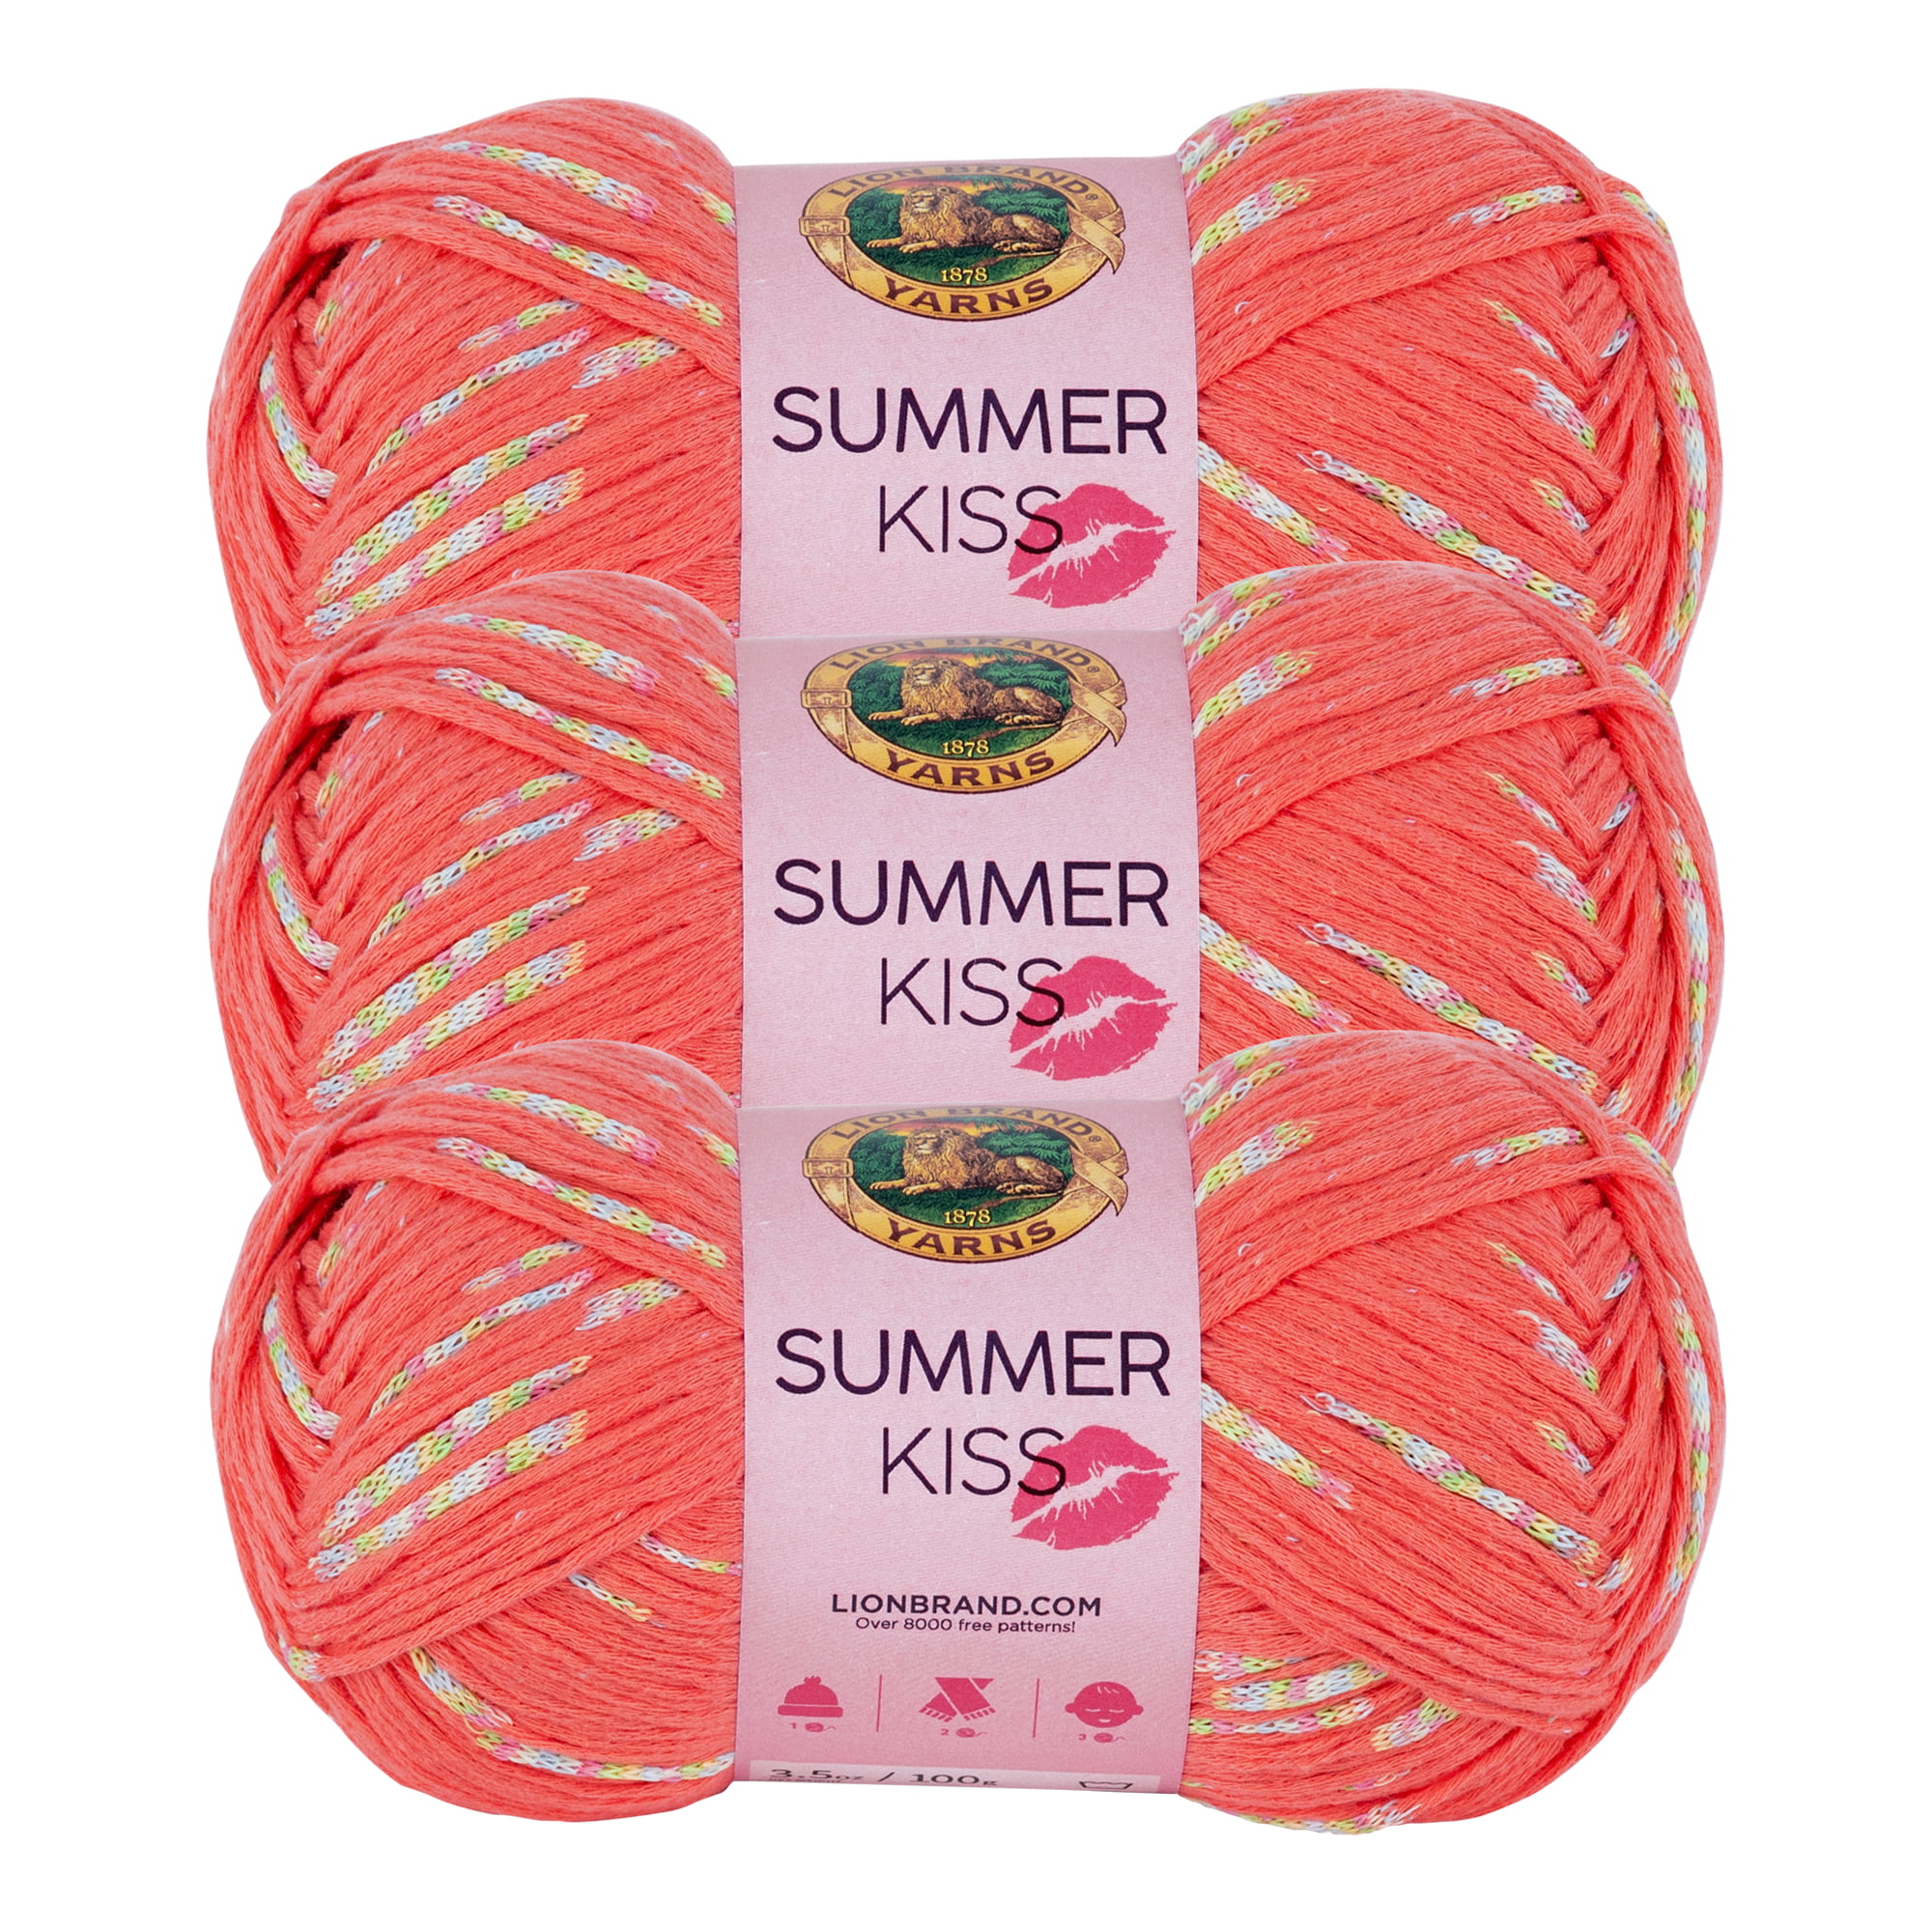 Lion Brand Yarn Summer Kiss Hibiscus I-Cord Medium Cotton, Polyester  Multi-color Yarn 3 Pack 